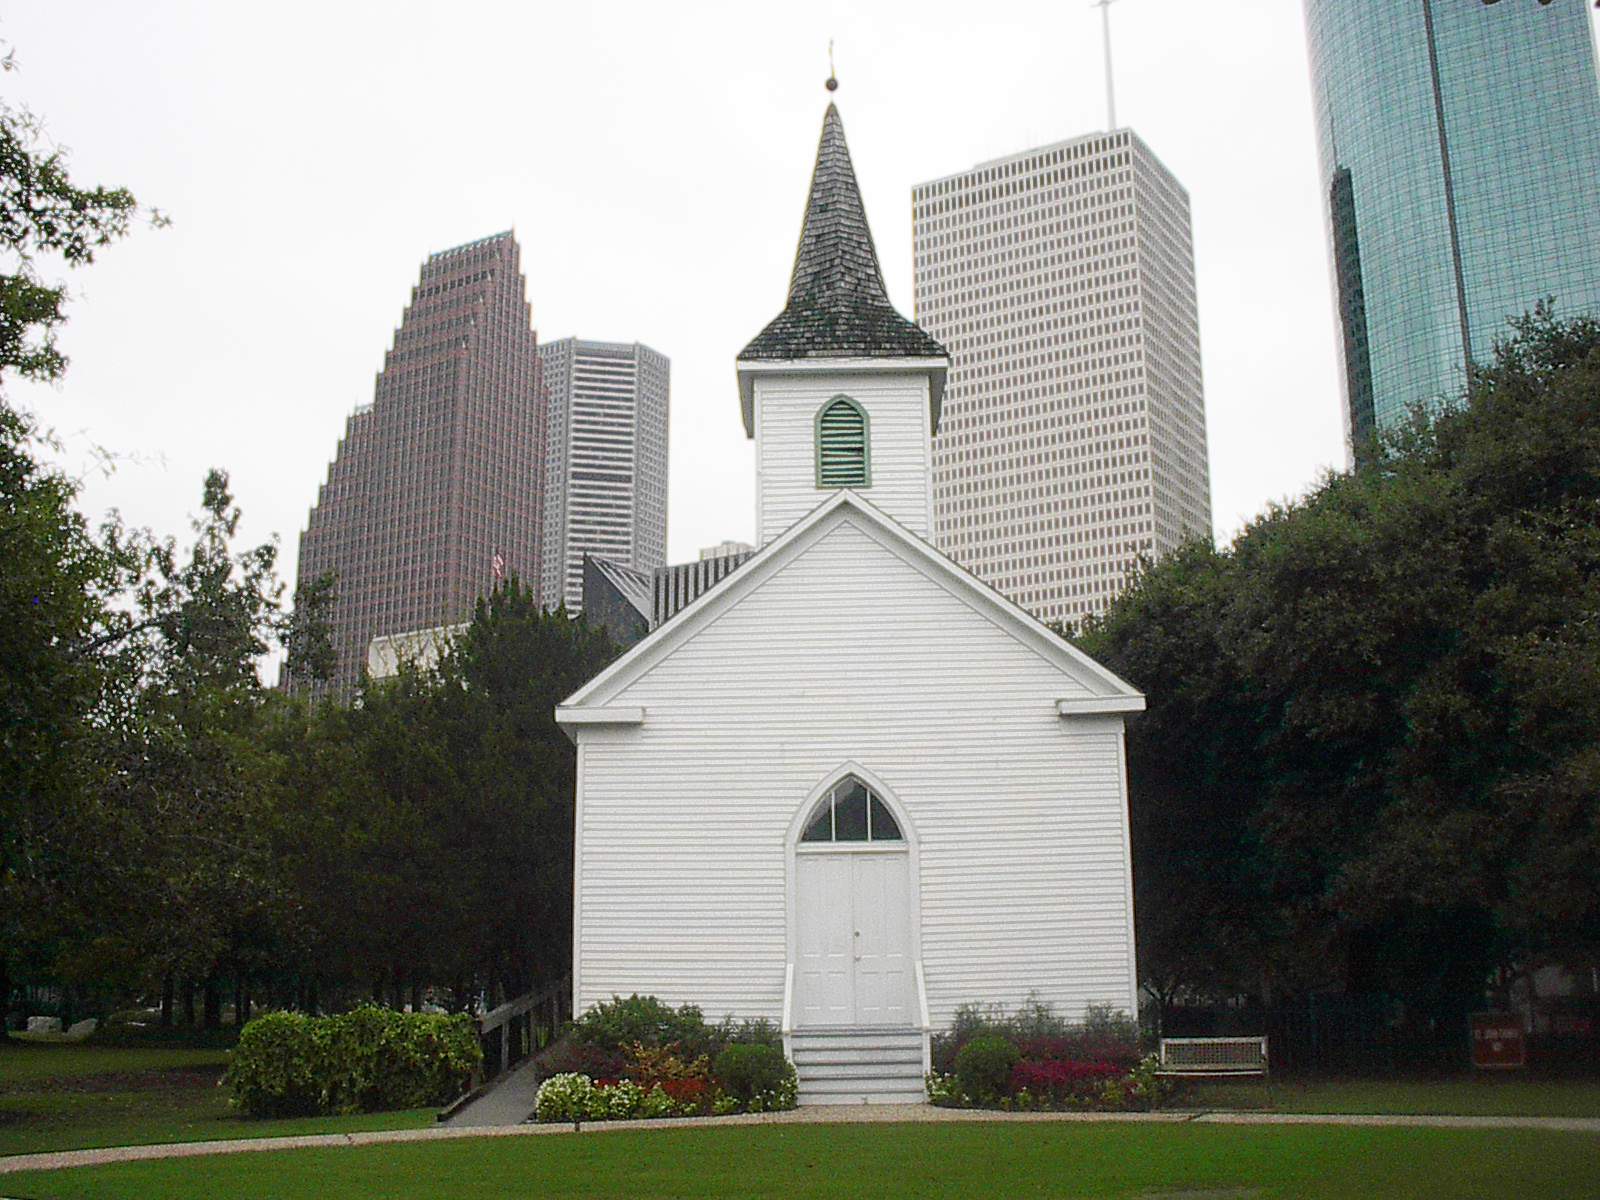 Say ‘I do’ downtown: Get hitched for $150 at St. John Church this Valentine’s Day